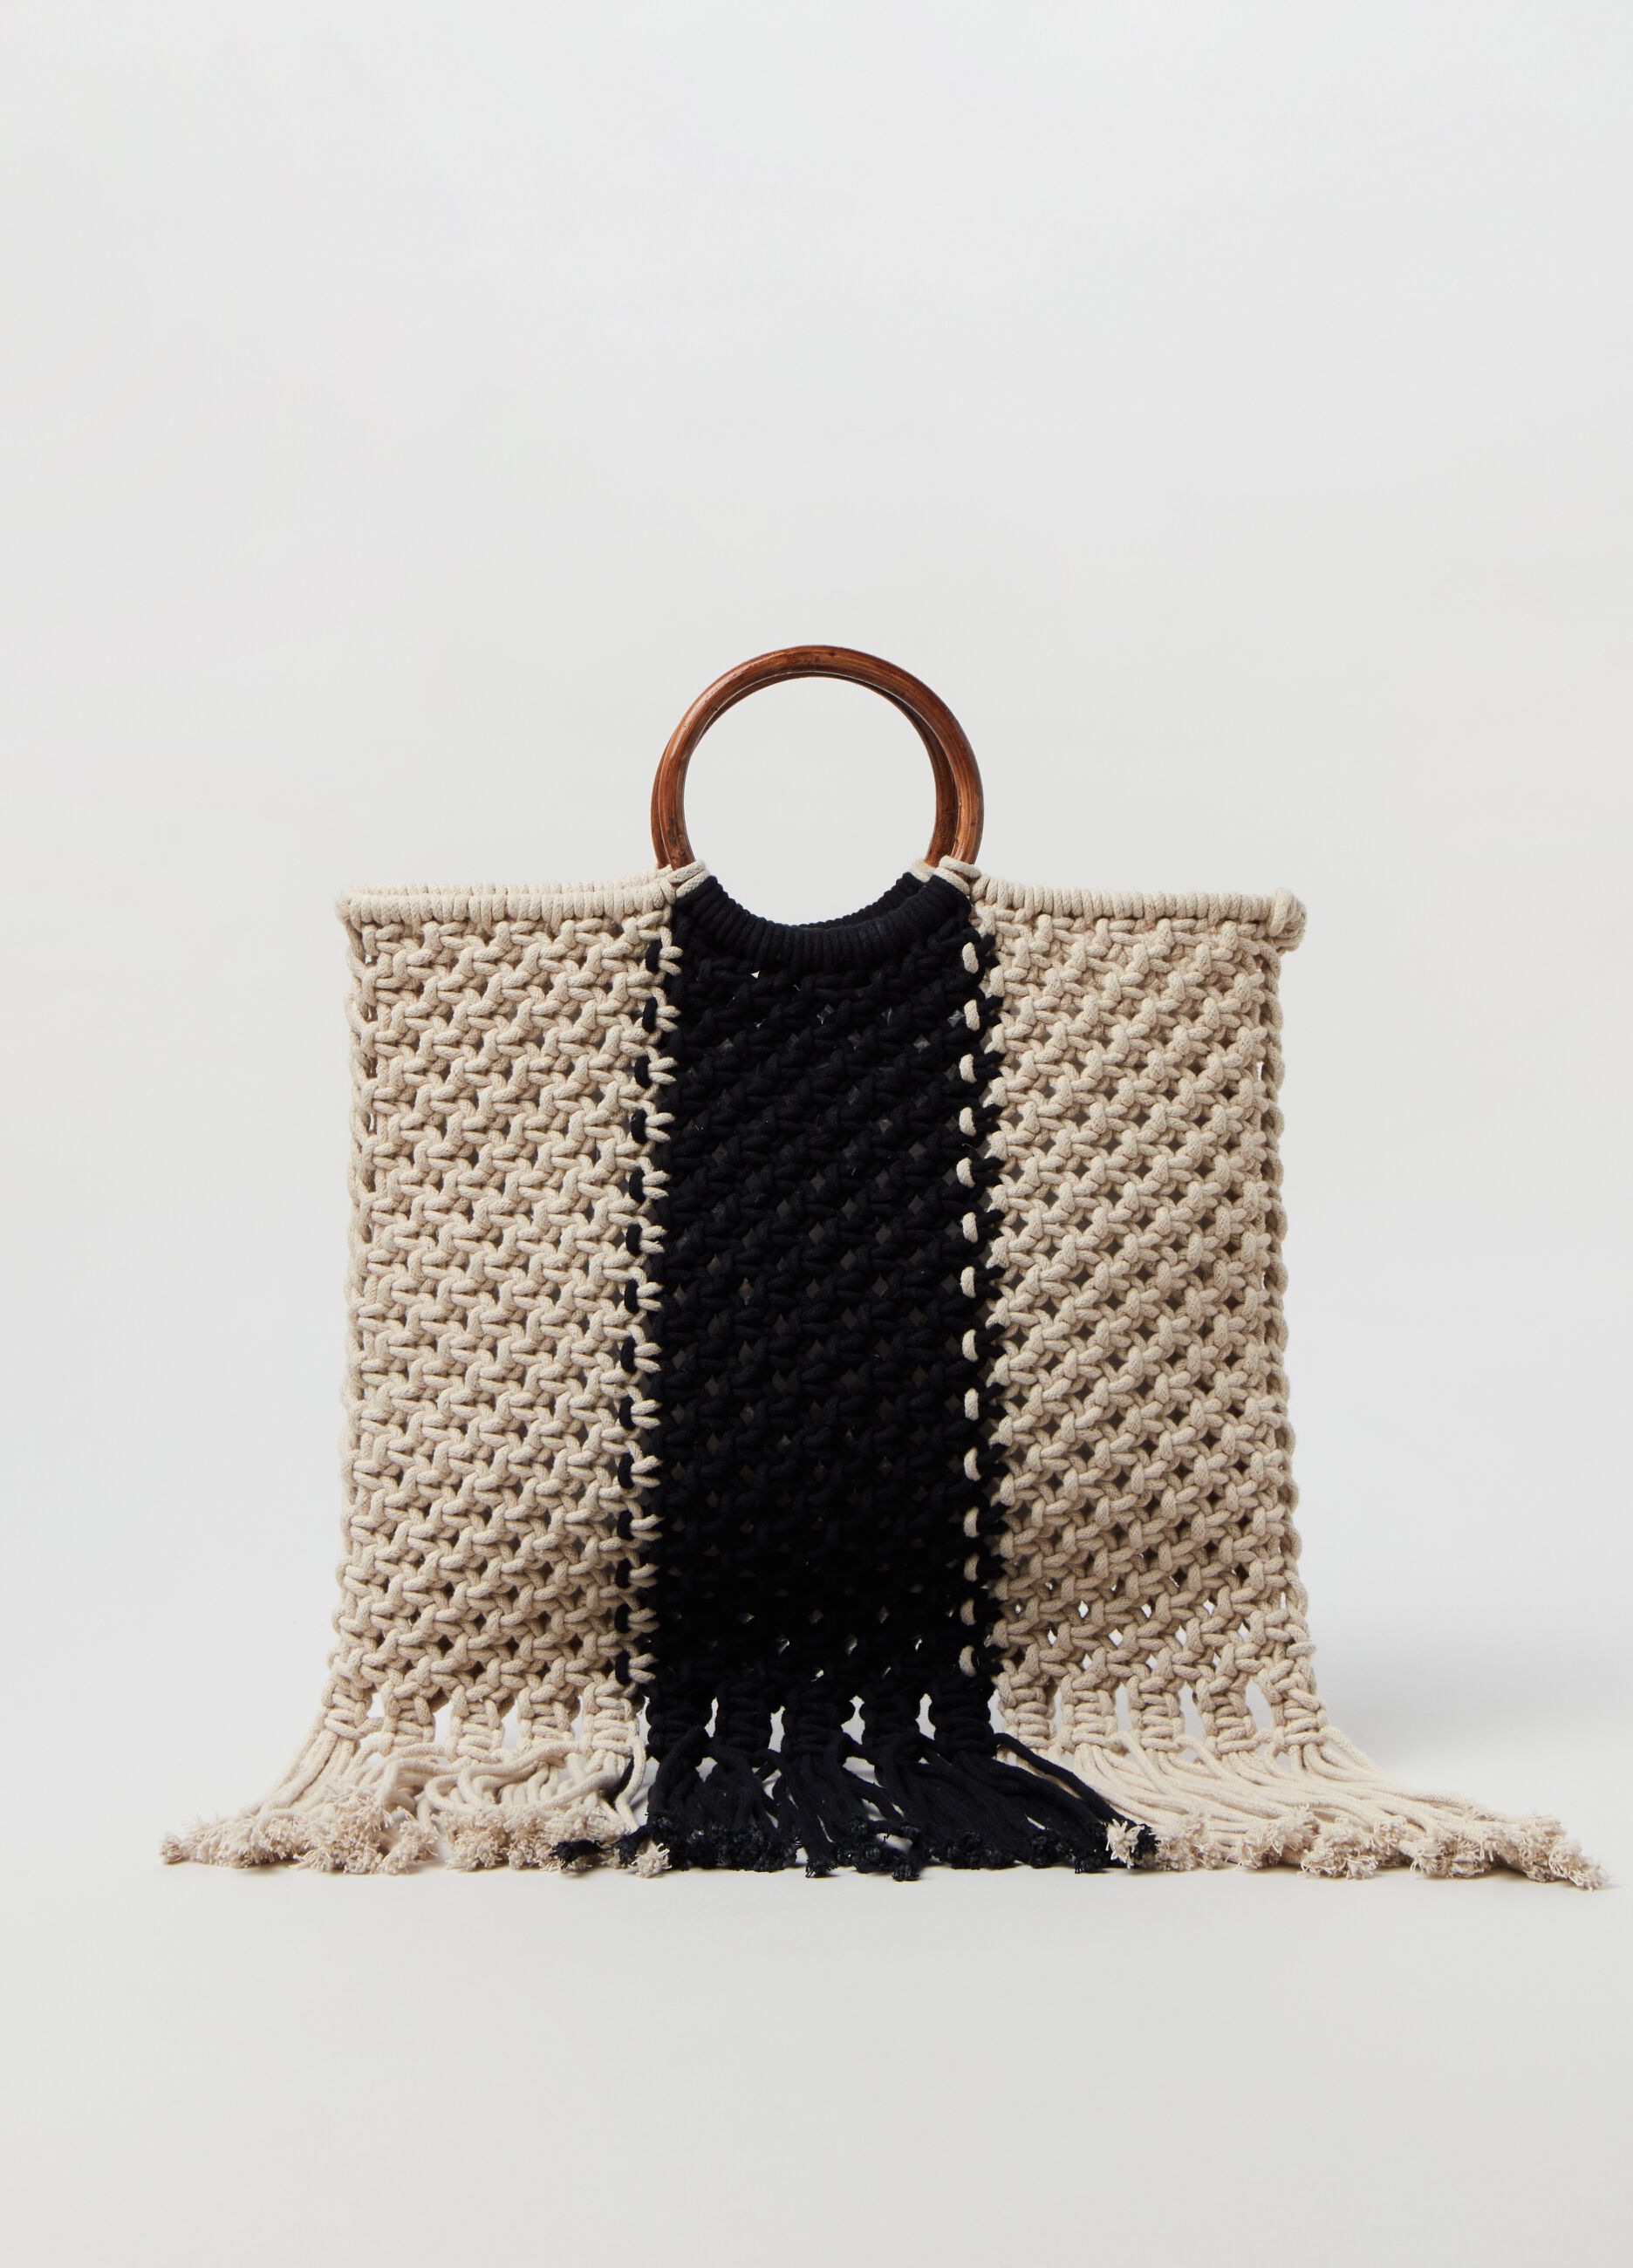 Crochet bag with fringing